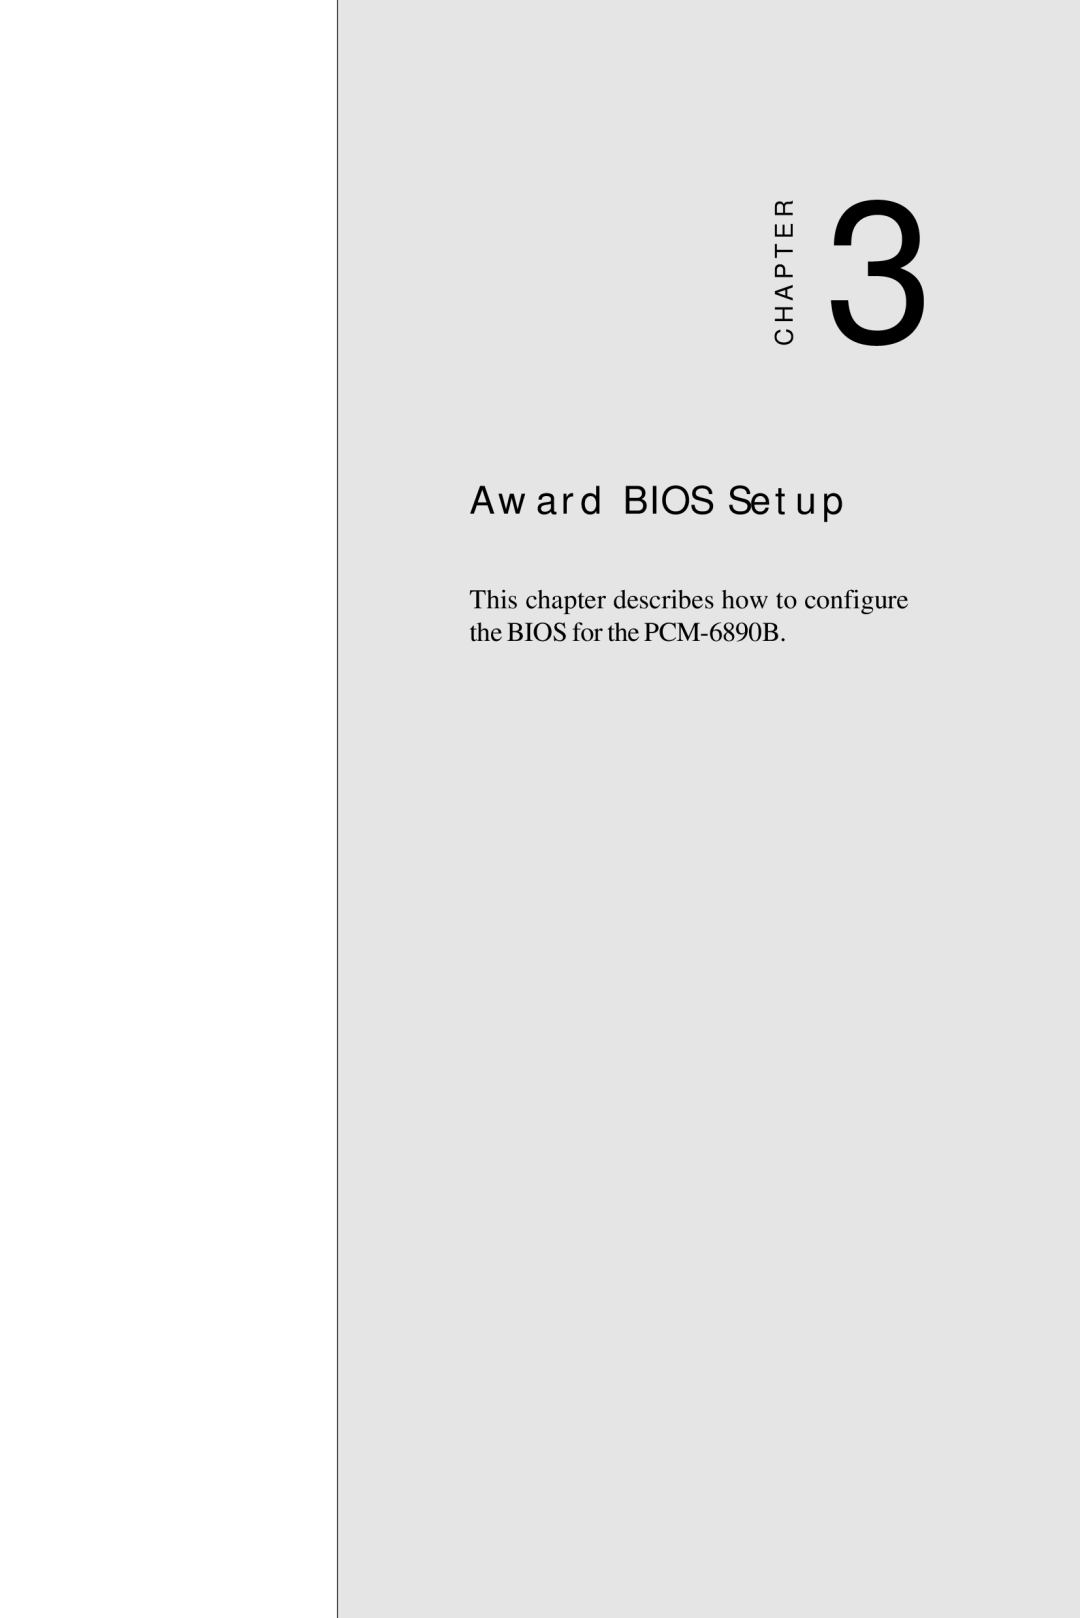 IBM All-in-One FC/Socket 370 Celeron Award BIOS Setup, This chapter describes how to configure the BIOS for the PCM-6890B 